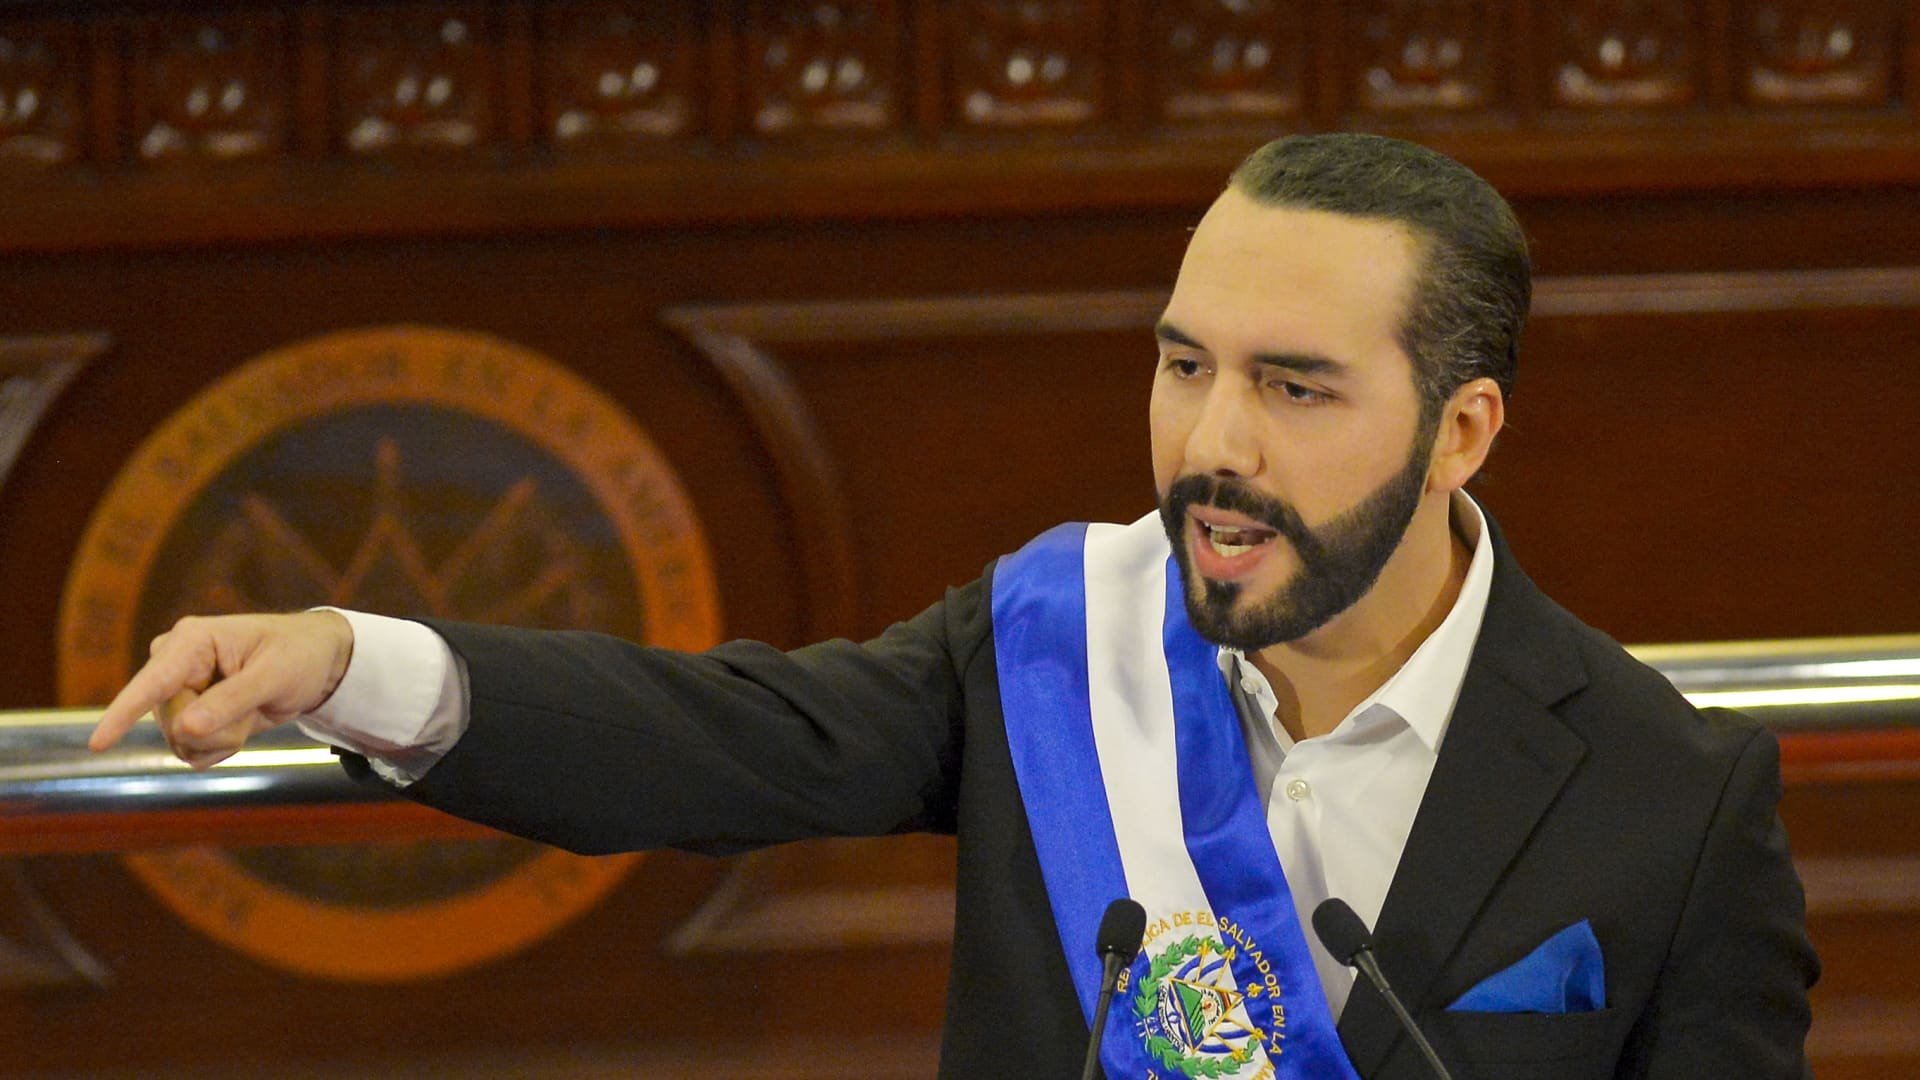 El Salvador looks to become the world’s first country to adopt bitcoin as legal tender